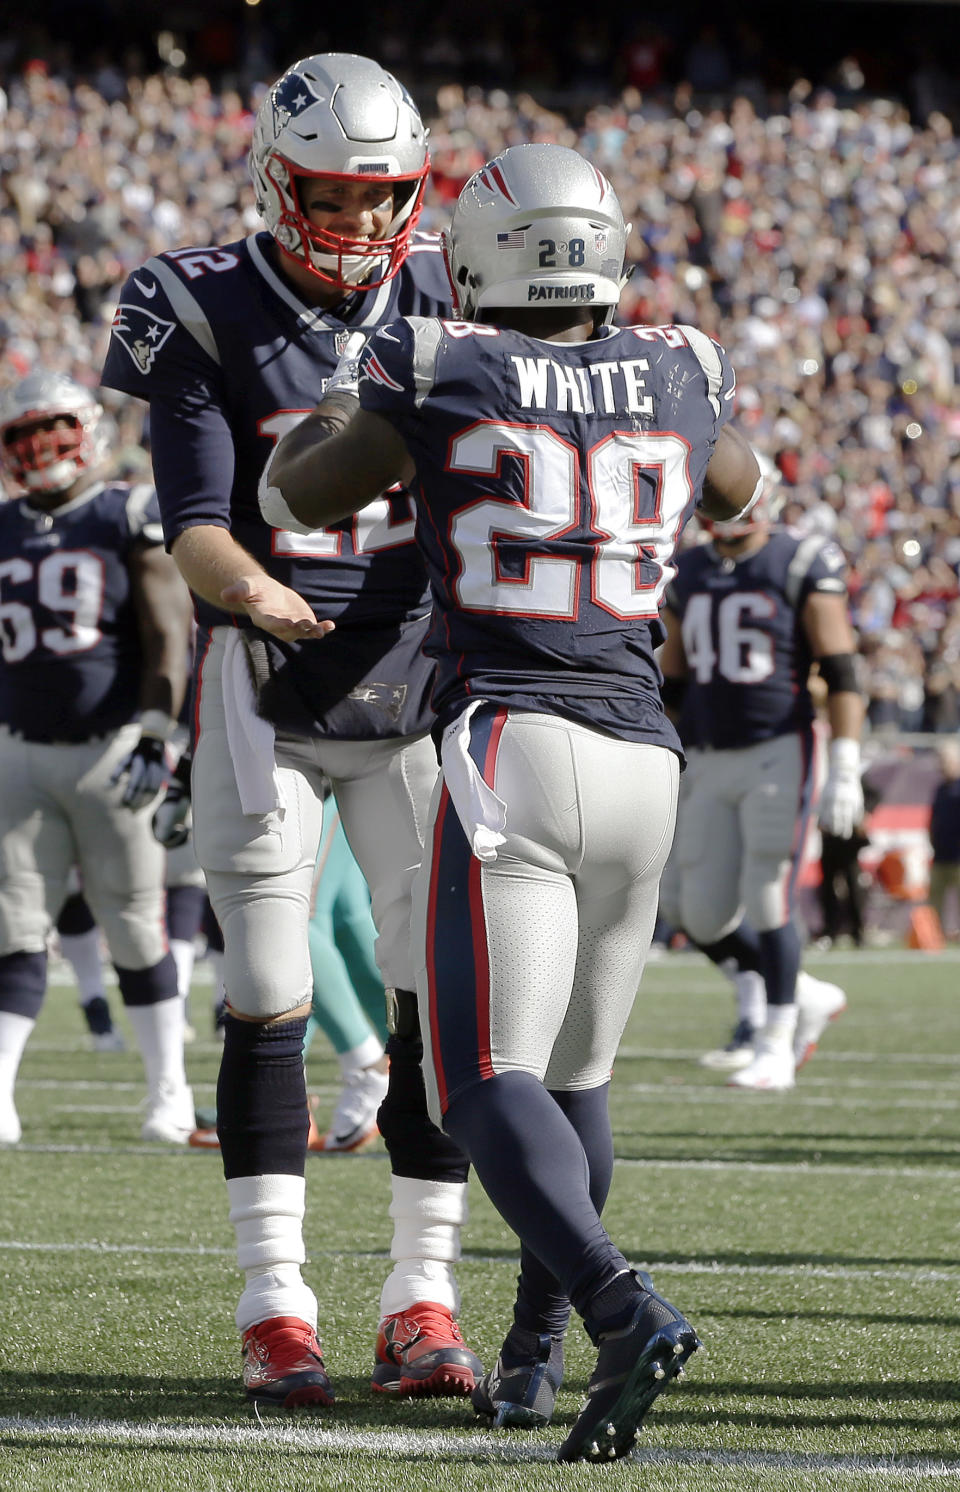 New England Patriots running back James White, right, celebrates his touchdown catch with quarterback Tom Brady during the second half of an NFL football game against the Miami Dolphins, Sunday, Sept. 30, 2018, in Foxborough, Mass. (AP Photo/Steven Senne)